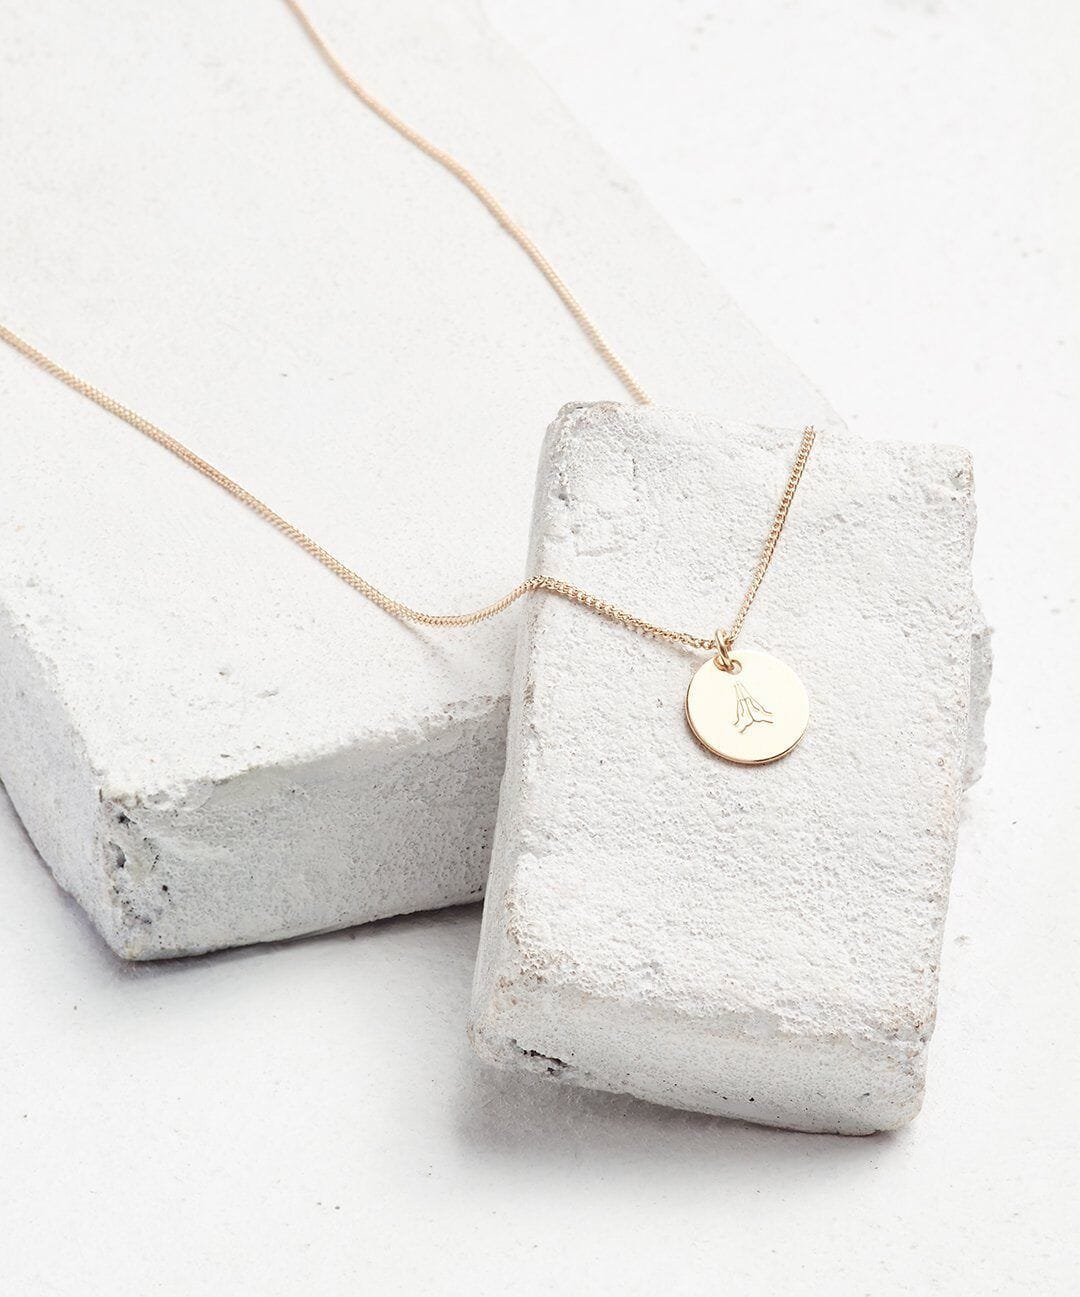 Buy Gold Tone Sparkle Disc Necklace from the Next UK online shop